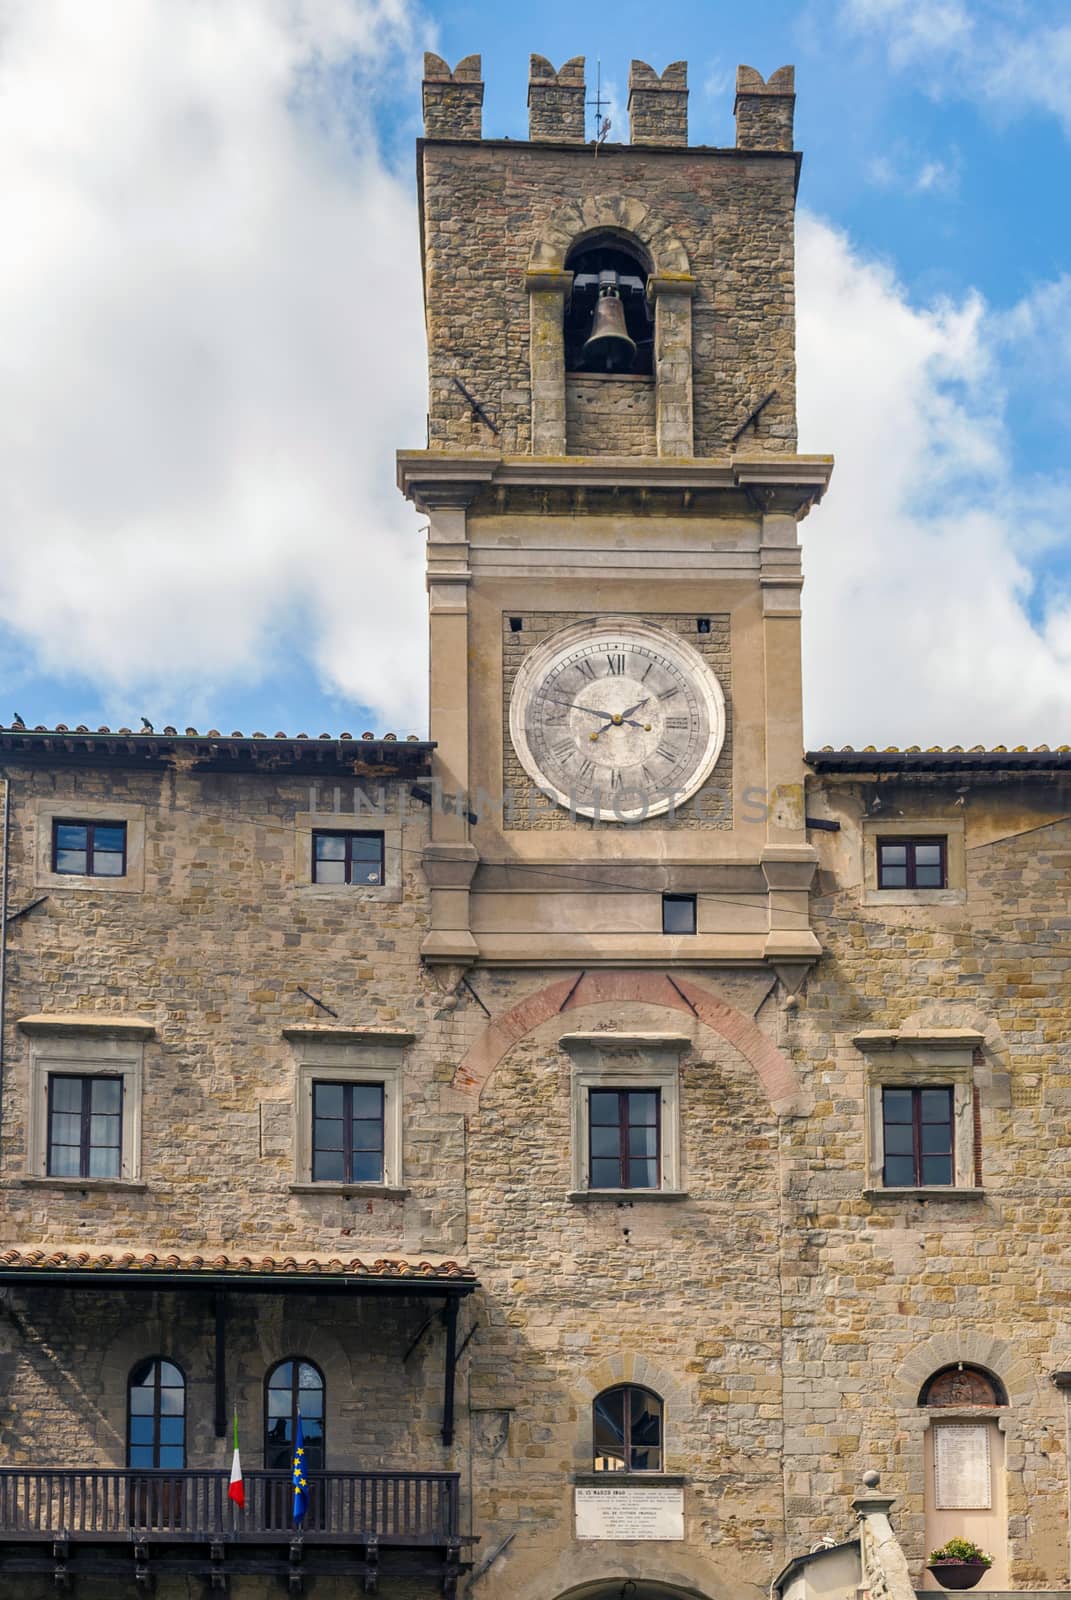 view of the town hall in the medieval city of Cortona, Tuscan , Italy